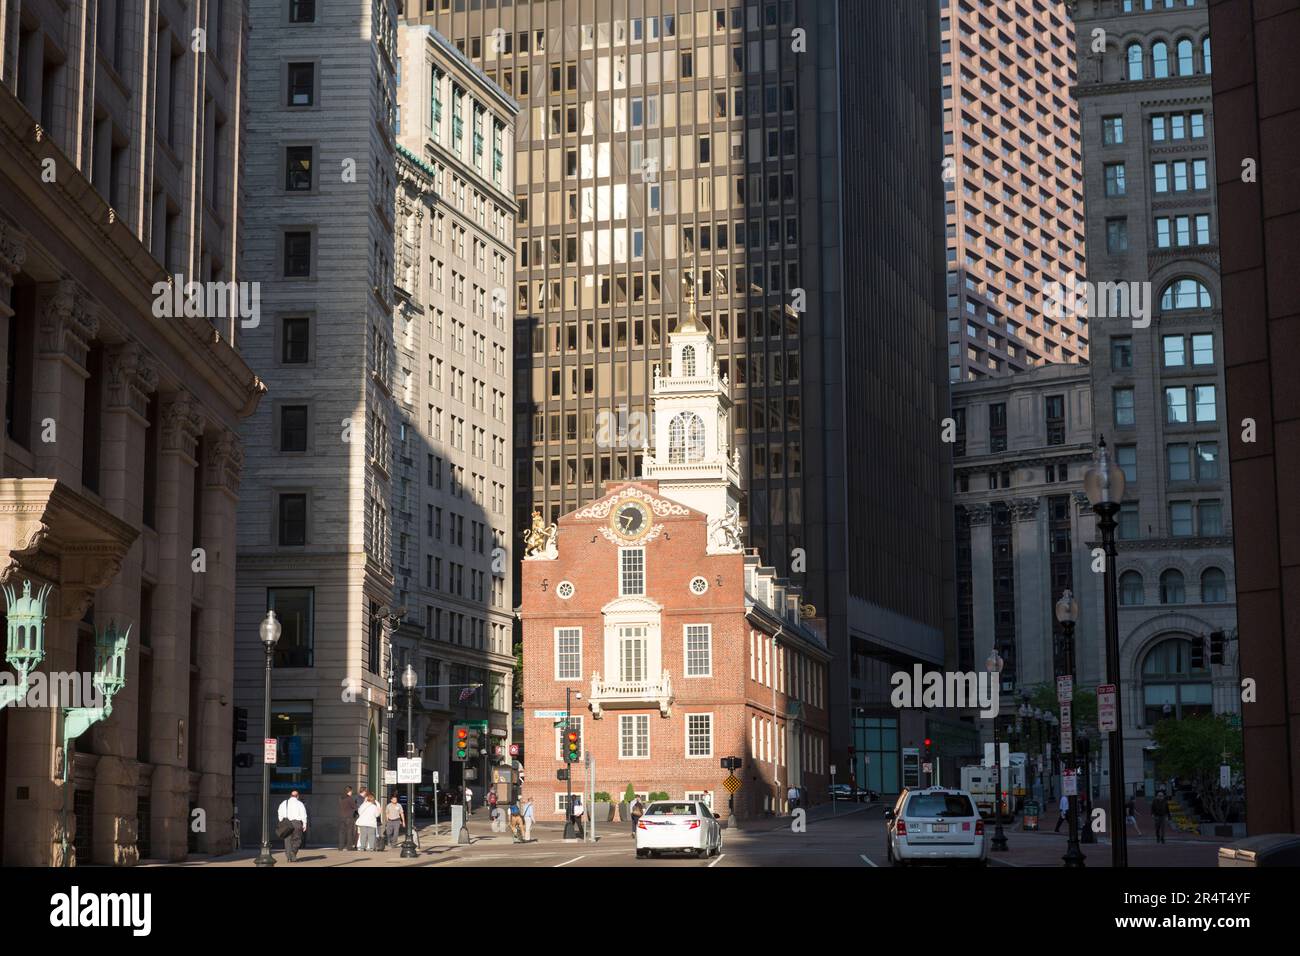 USA, Massachusetts, Boston, Old State House with John Hancock building in background. Stock Photo